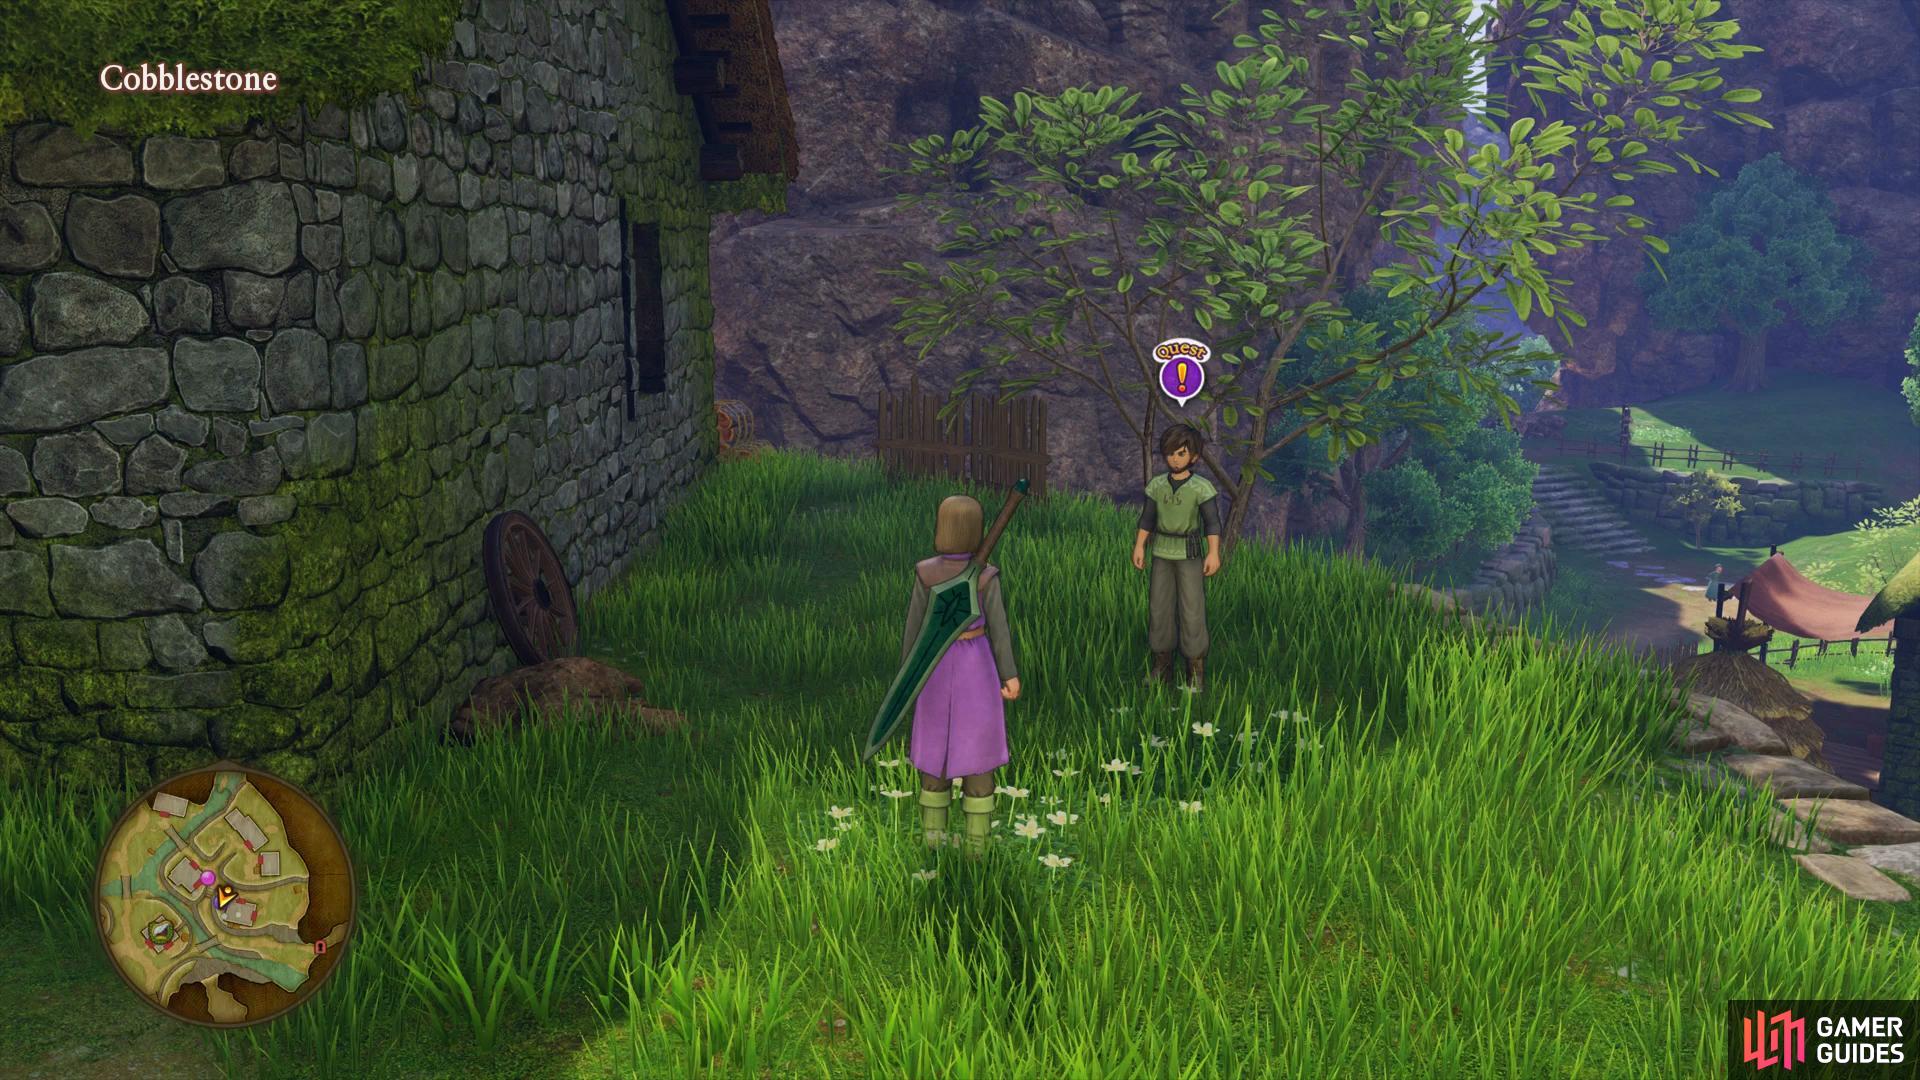 Review: Dragon Quest XI looks new but feels old